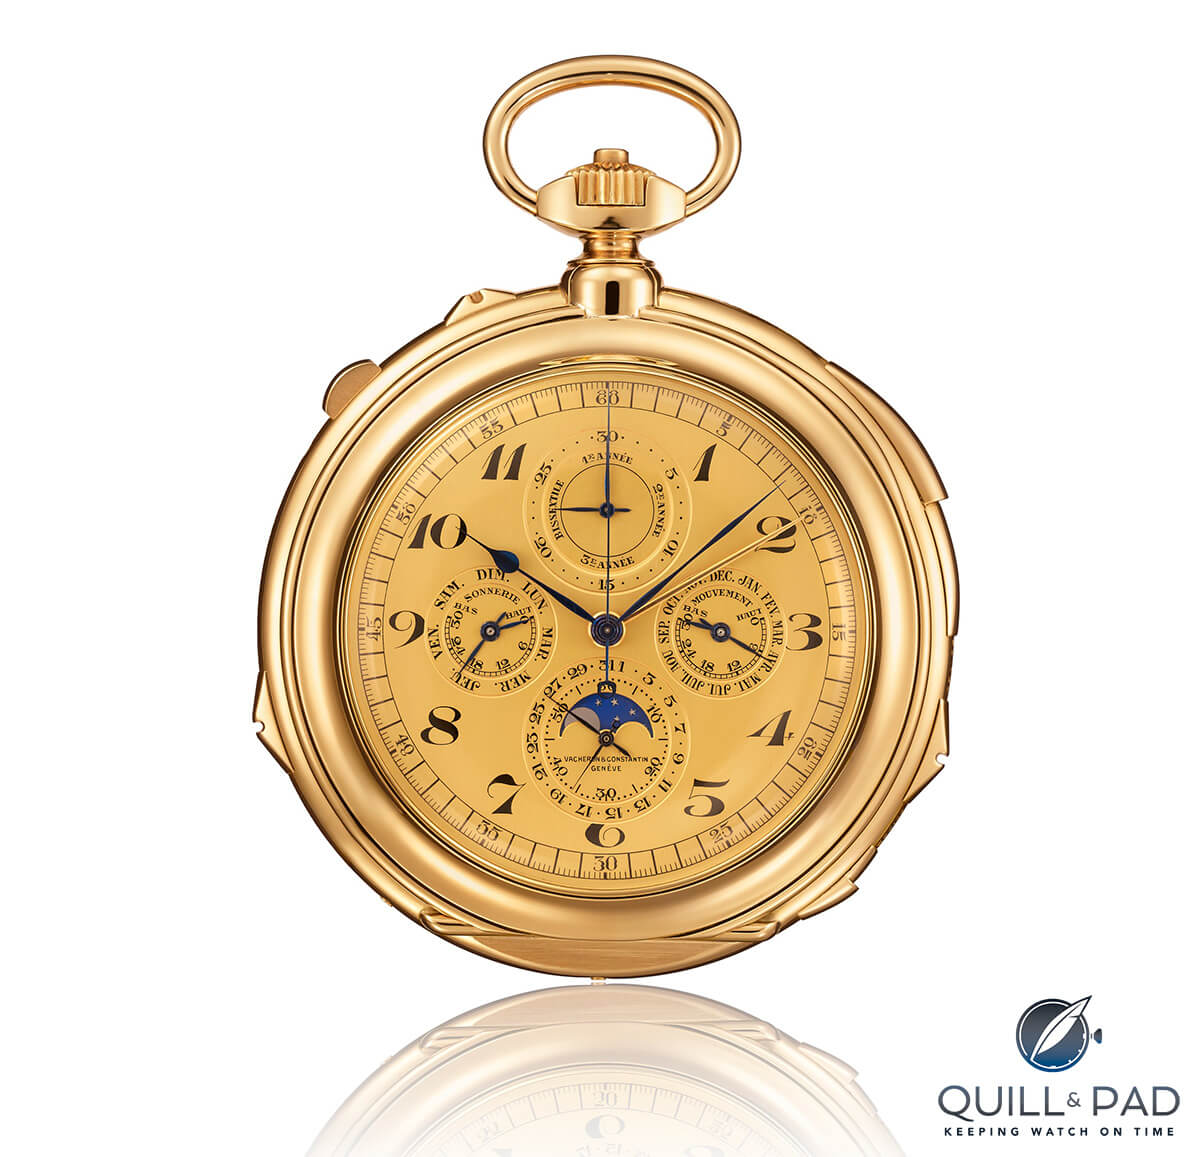 Vacheron Constantin’s second most complicated pocket watch in history: the King Farouk I